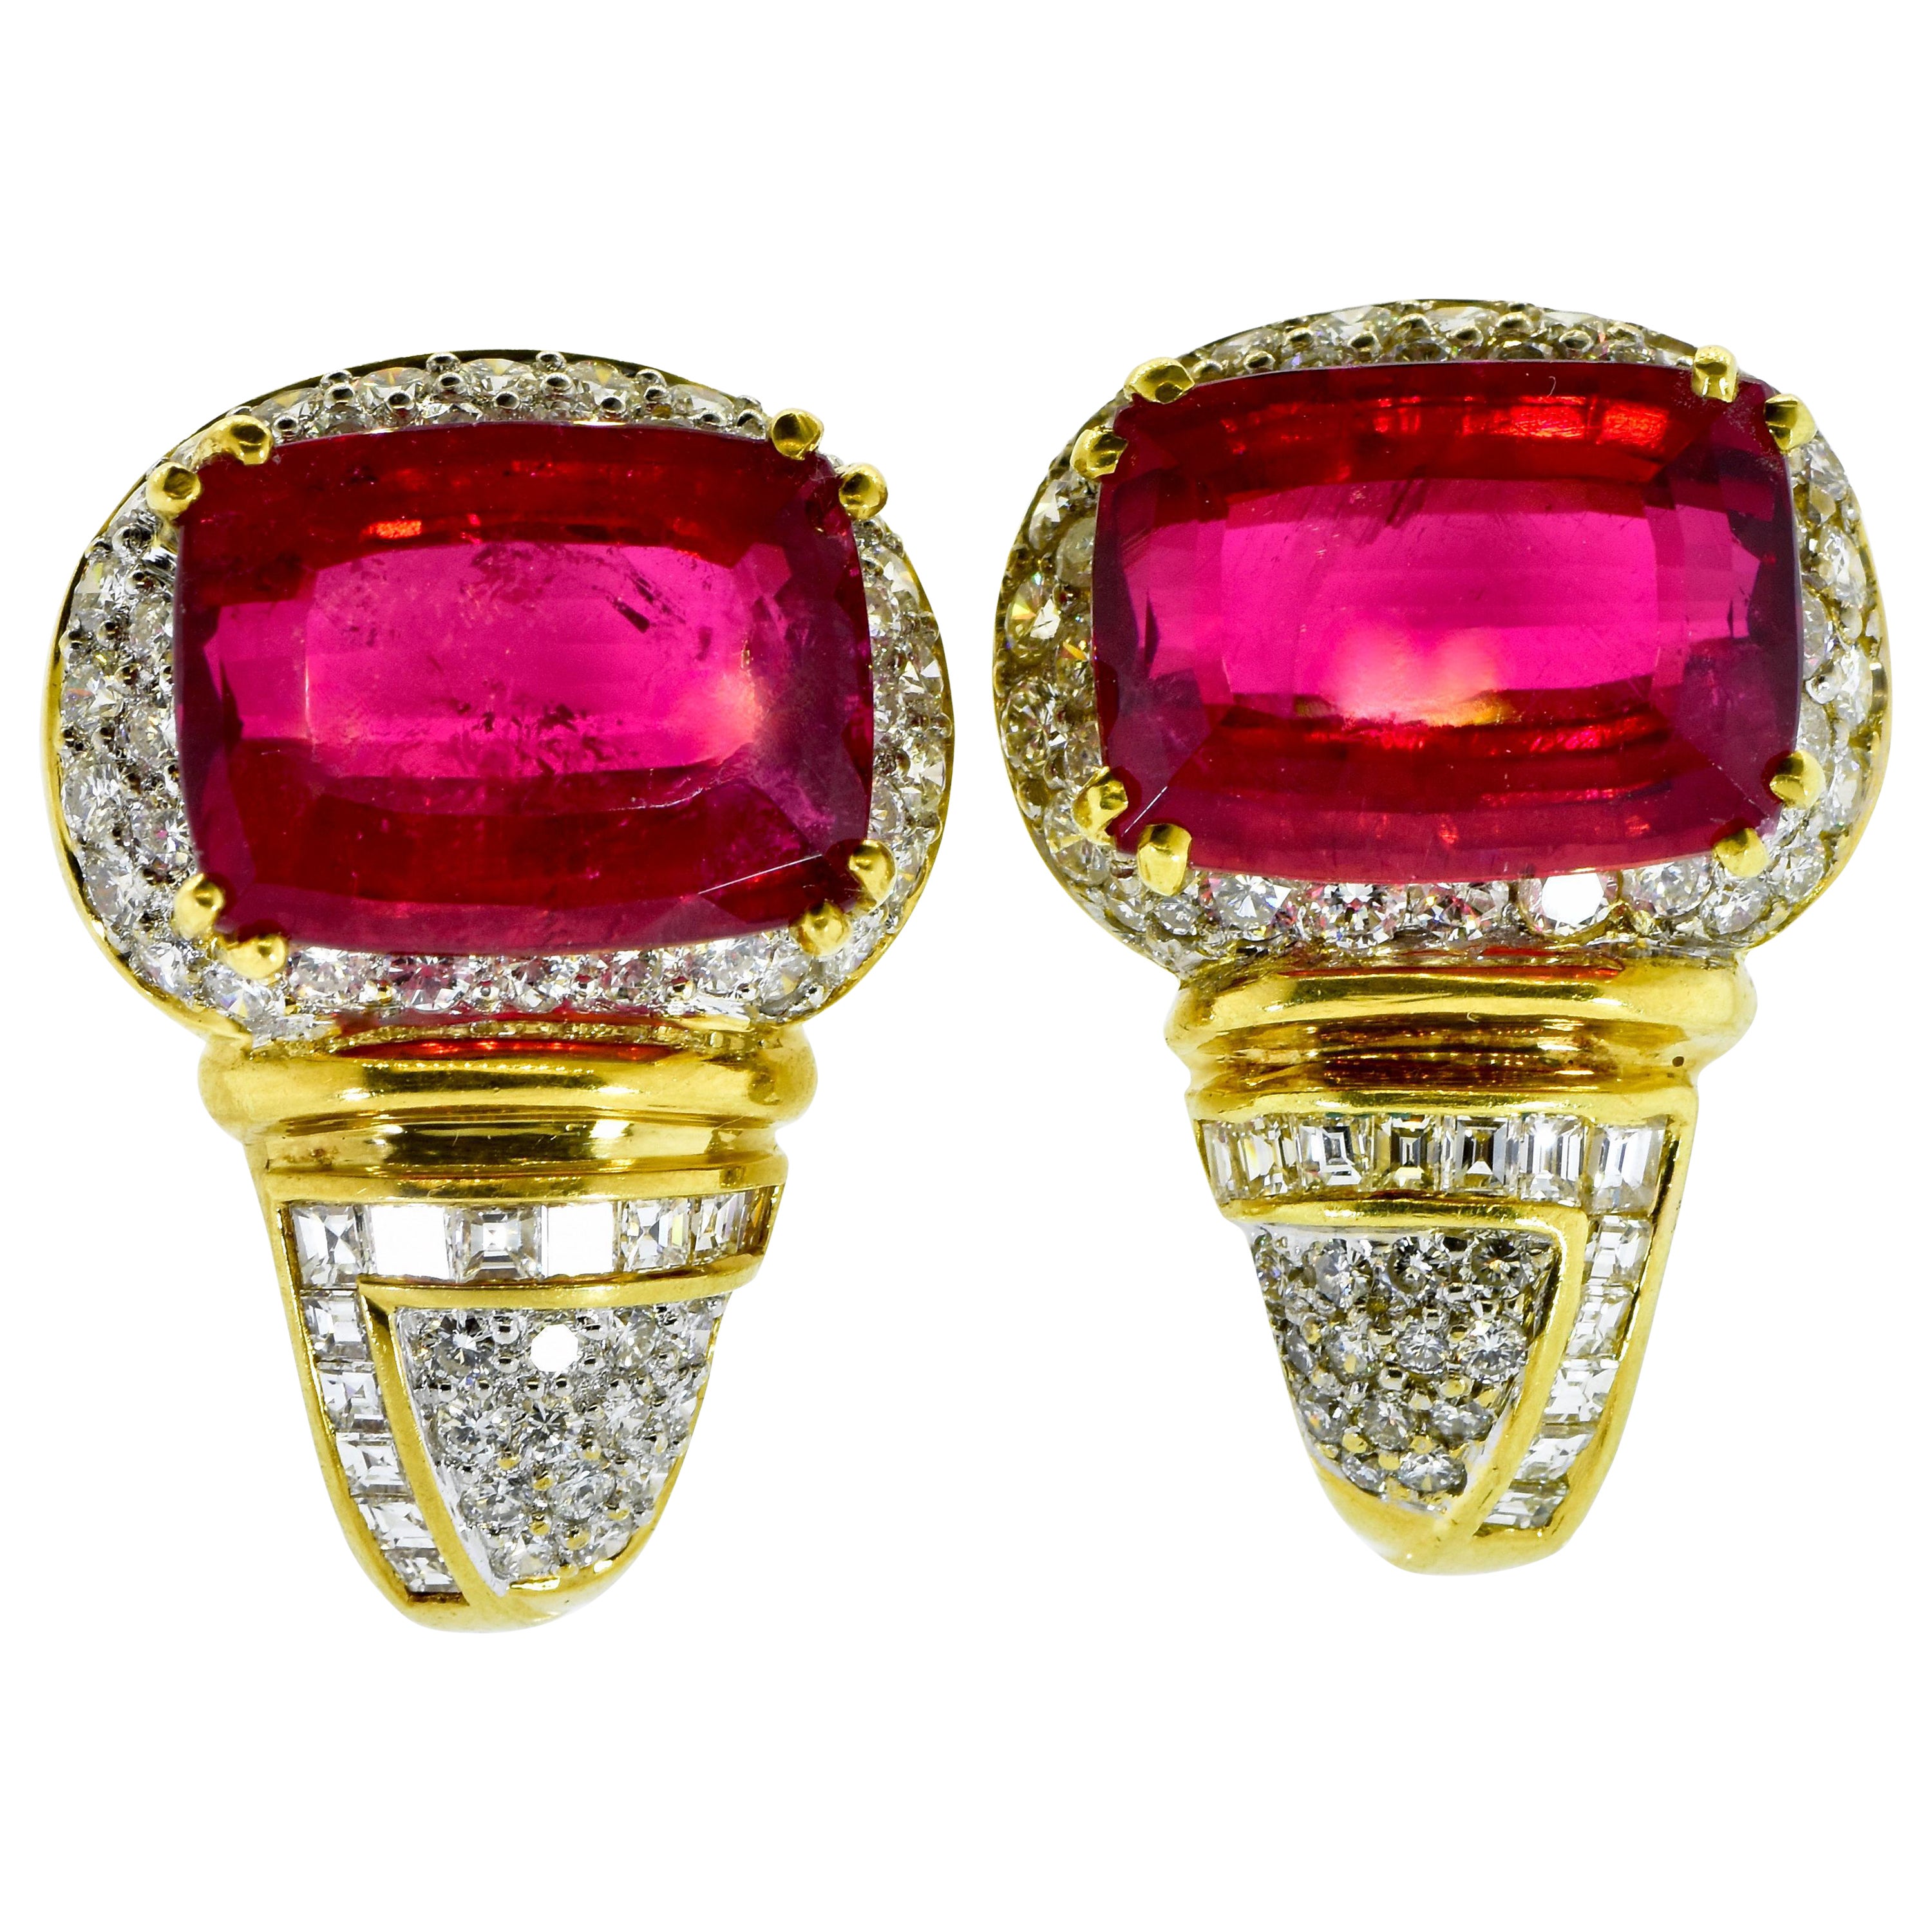 Red Tourmaline weighing 26 Cts. with fine Diamonds, 5 cts., in 18k Fine Earrings For Sale